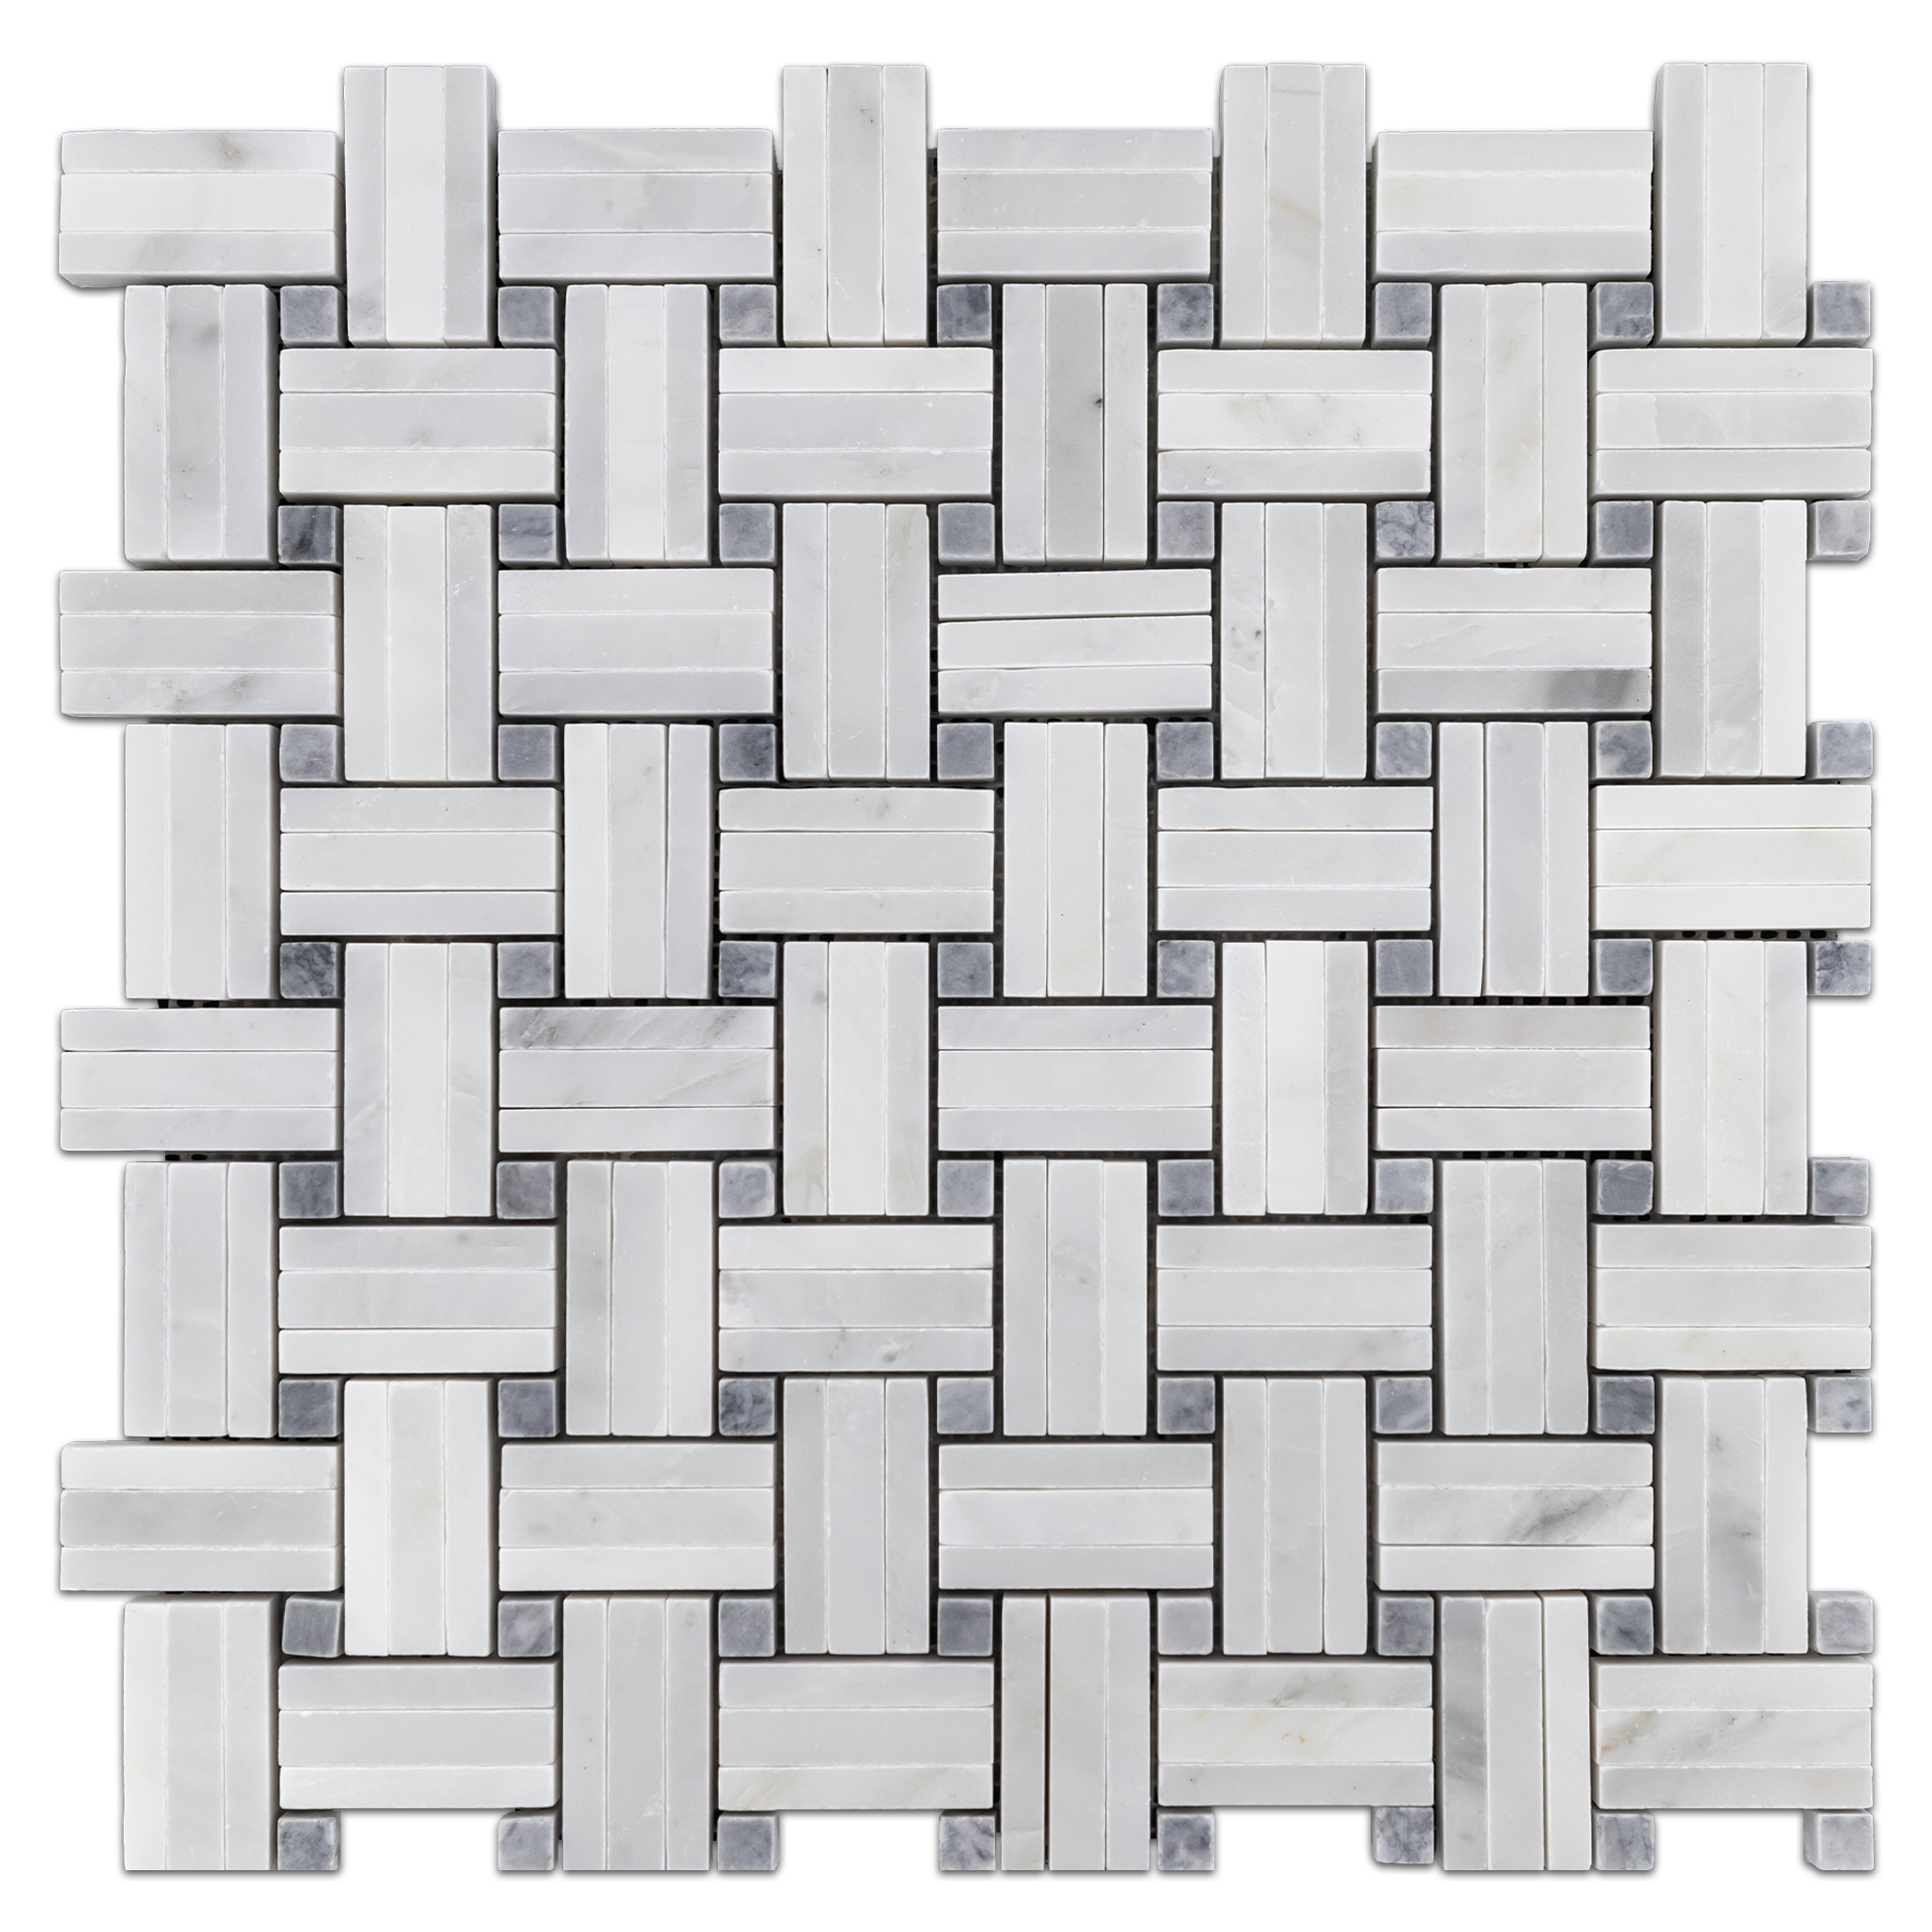 Elon Pearl White Pacific Gray Marble Tri Weave Basketweave Field Mosaic 12x12x0.375 Honed - Surface Group Online Tile Store